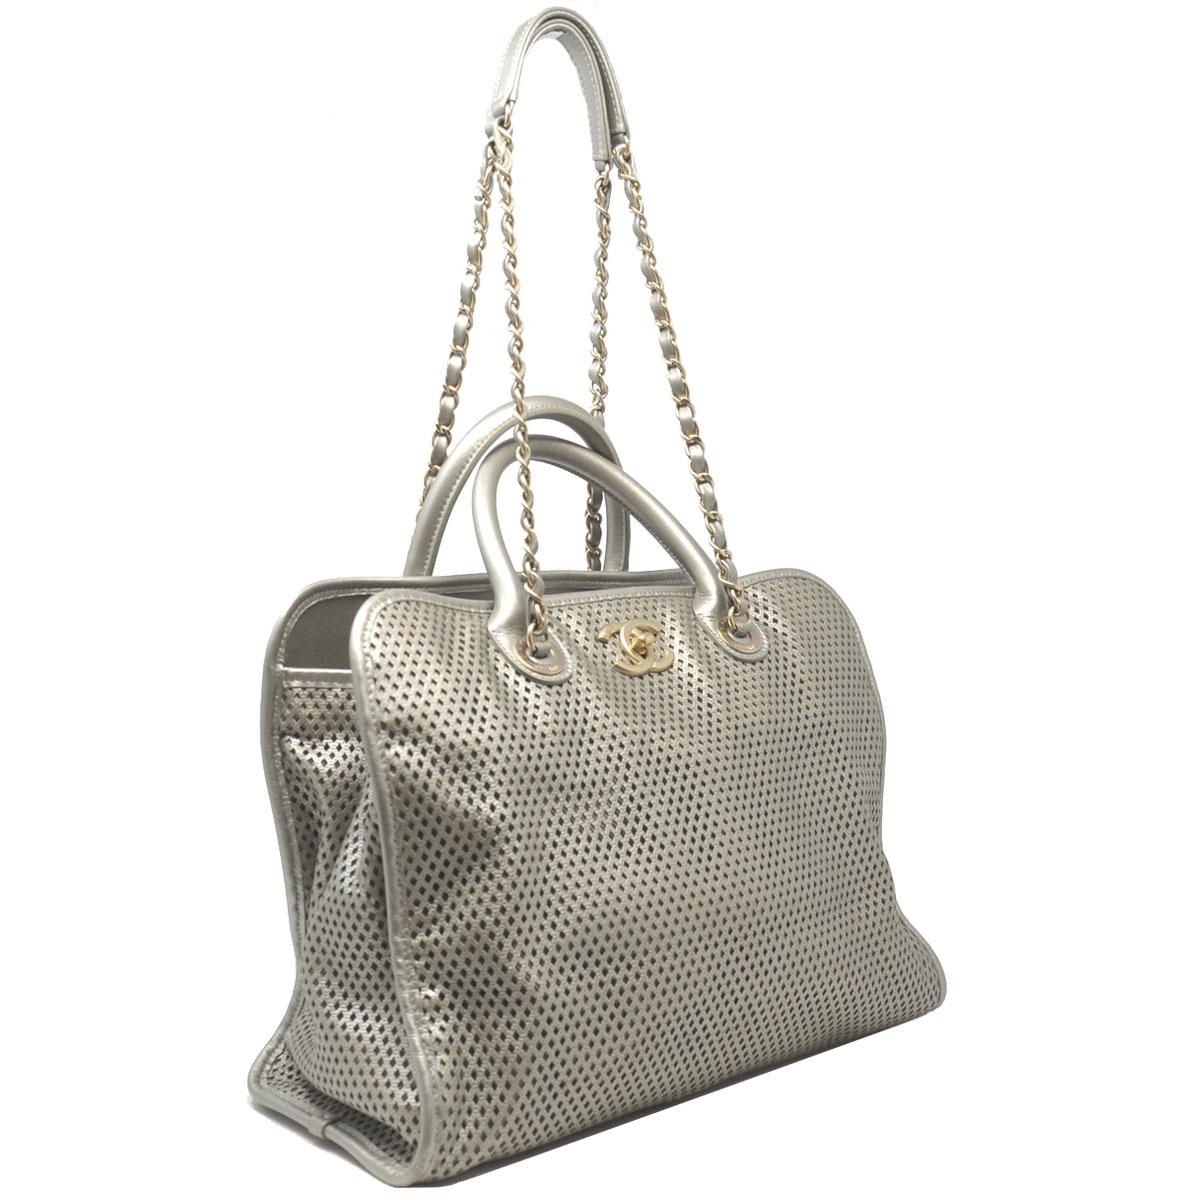 Company-Chanel
Model-Gray Metallic GHW Perforated Leather Tote Handbag 
Color-Gray Metallic 
Date Code-17490649
Material-Leather
Measurements-13